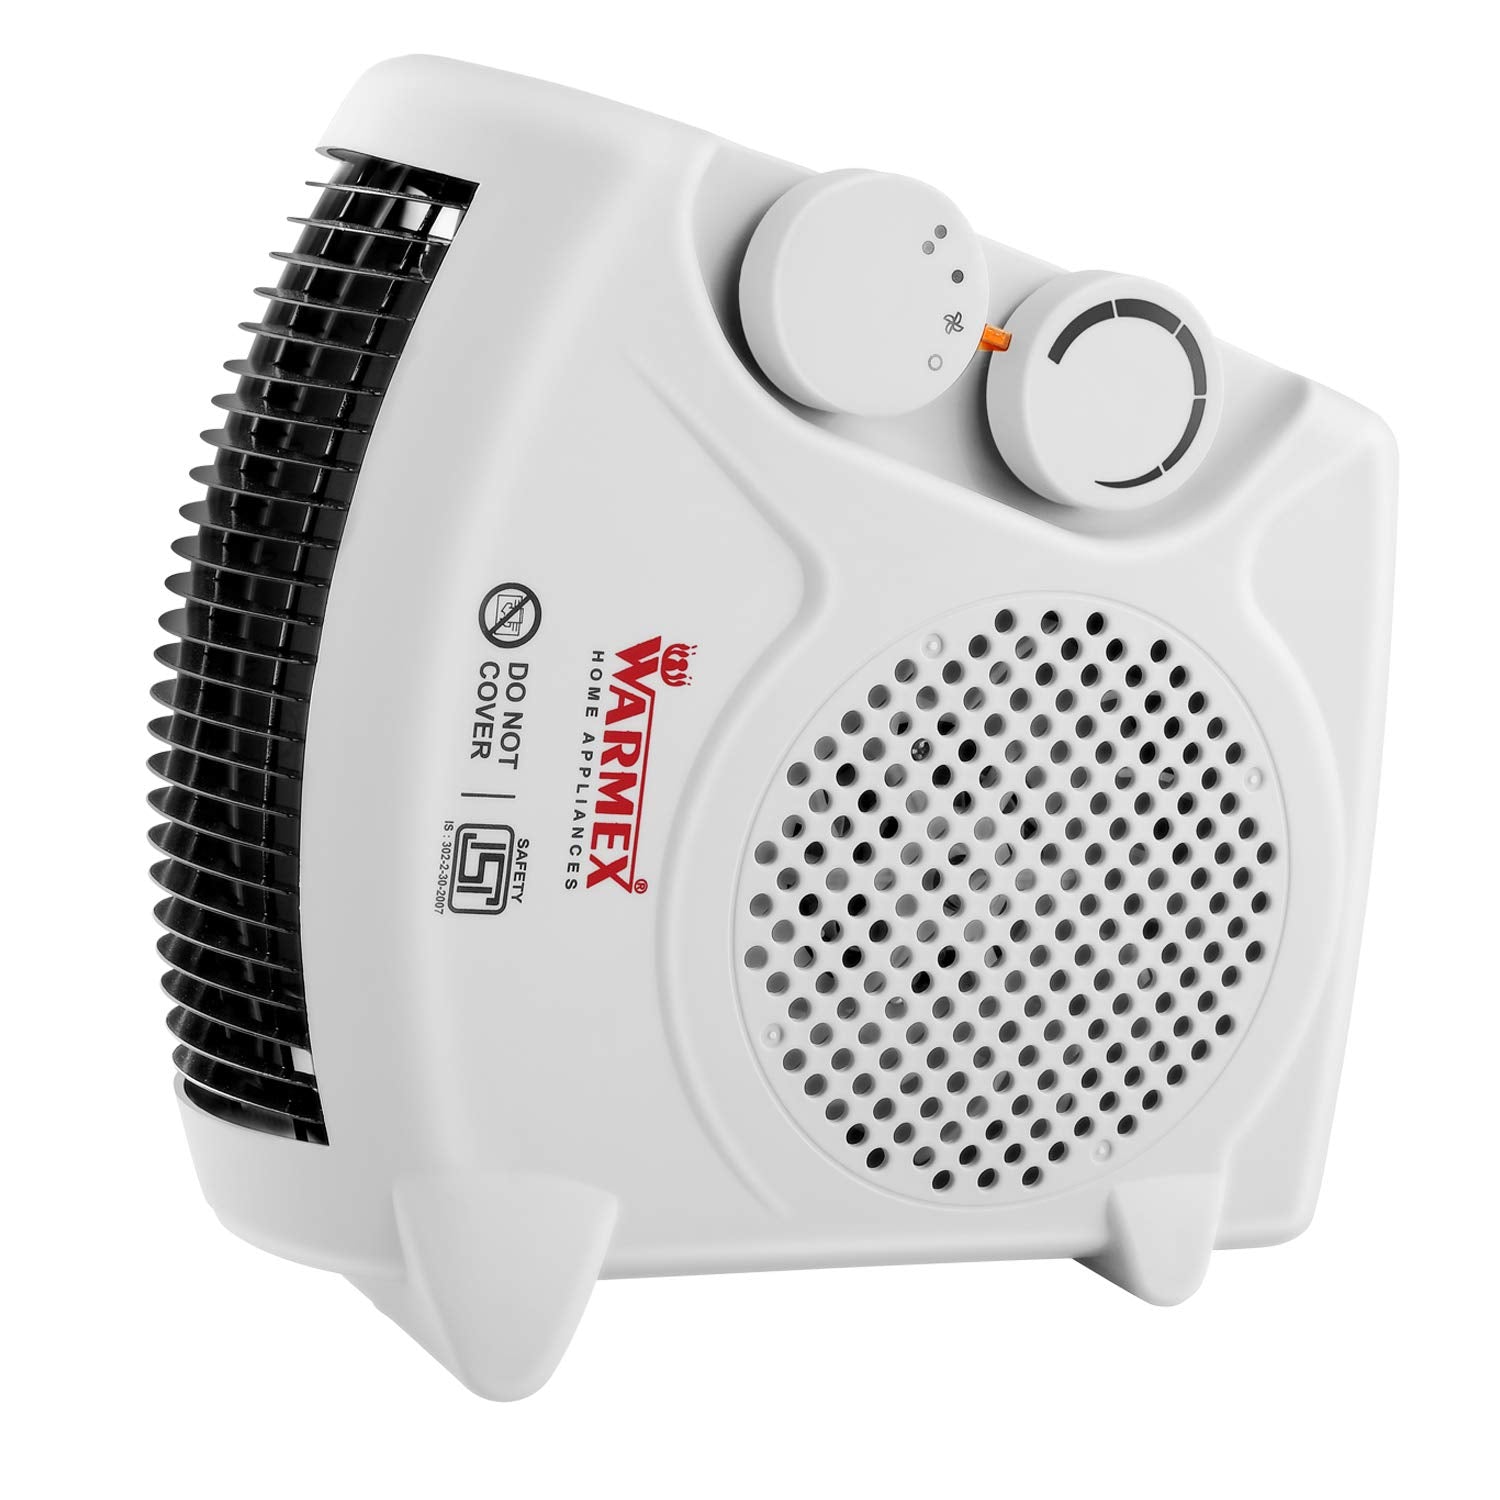 Warmex 1000 Watts FAN HEATER (FH 09) with Dual Placement Color: White warmexhomeappliances2